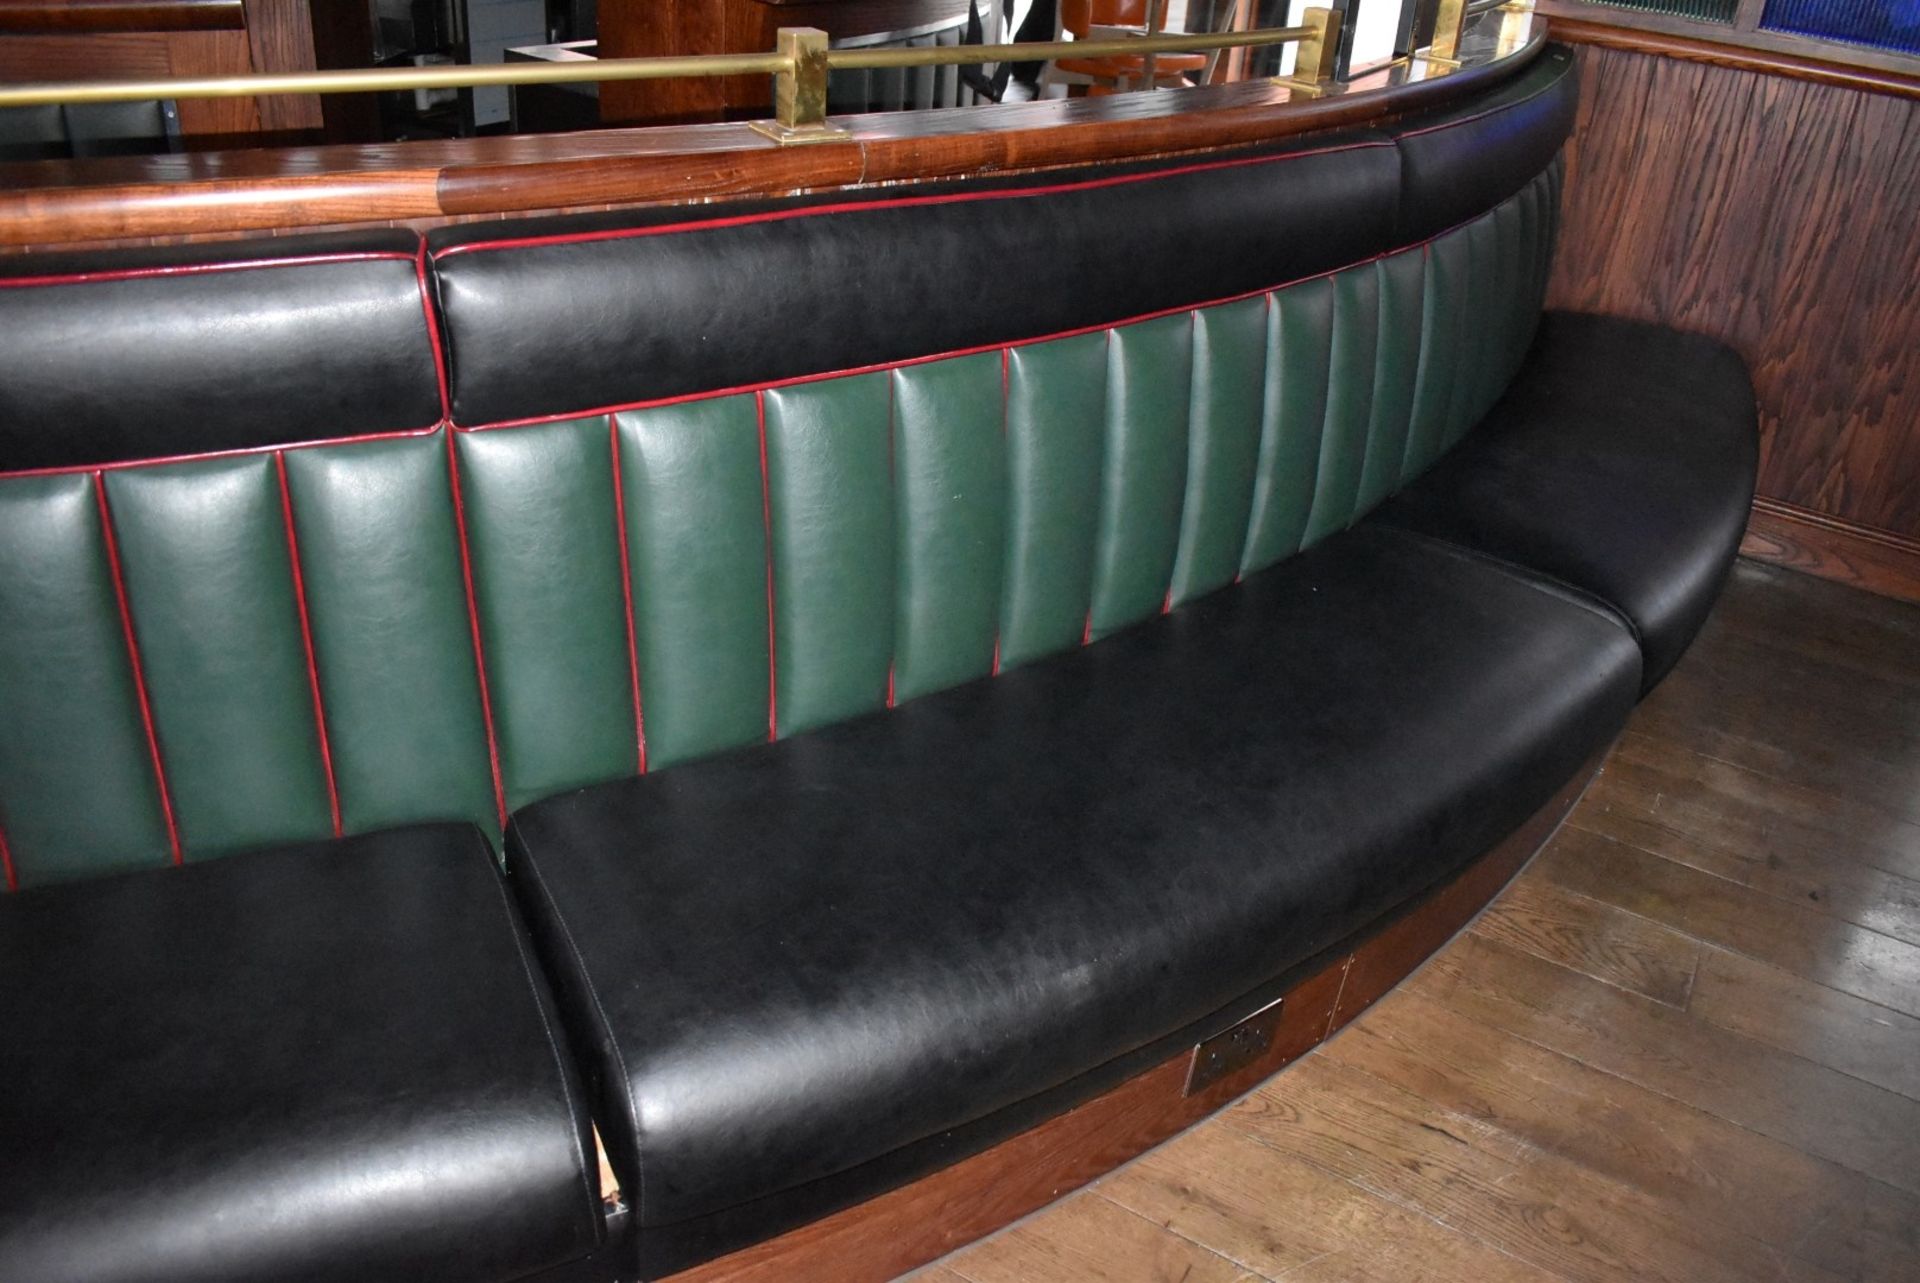 1 x Banqueting Seating Bench - 15ft in Length - Green & Black Upholstery With Vertical Fluted Back - Image 7 of 11